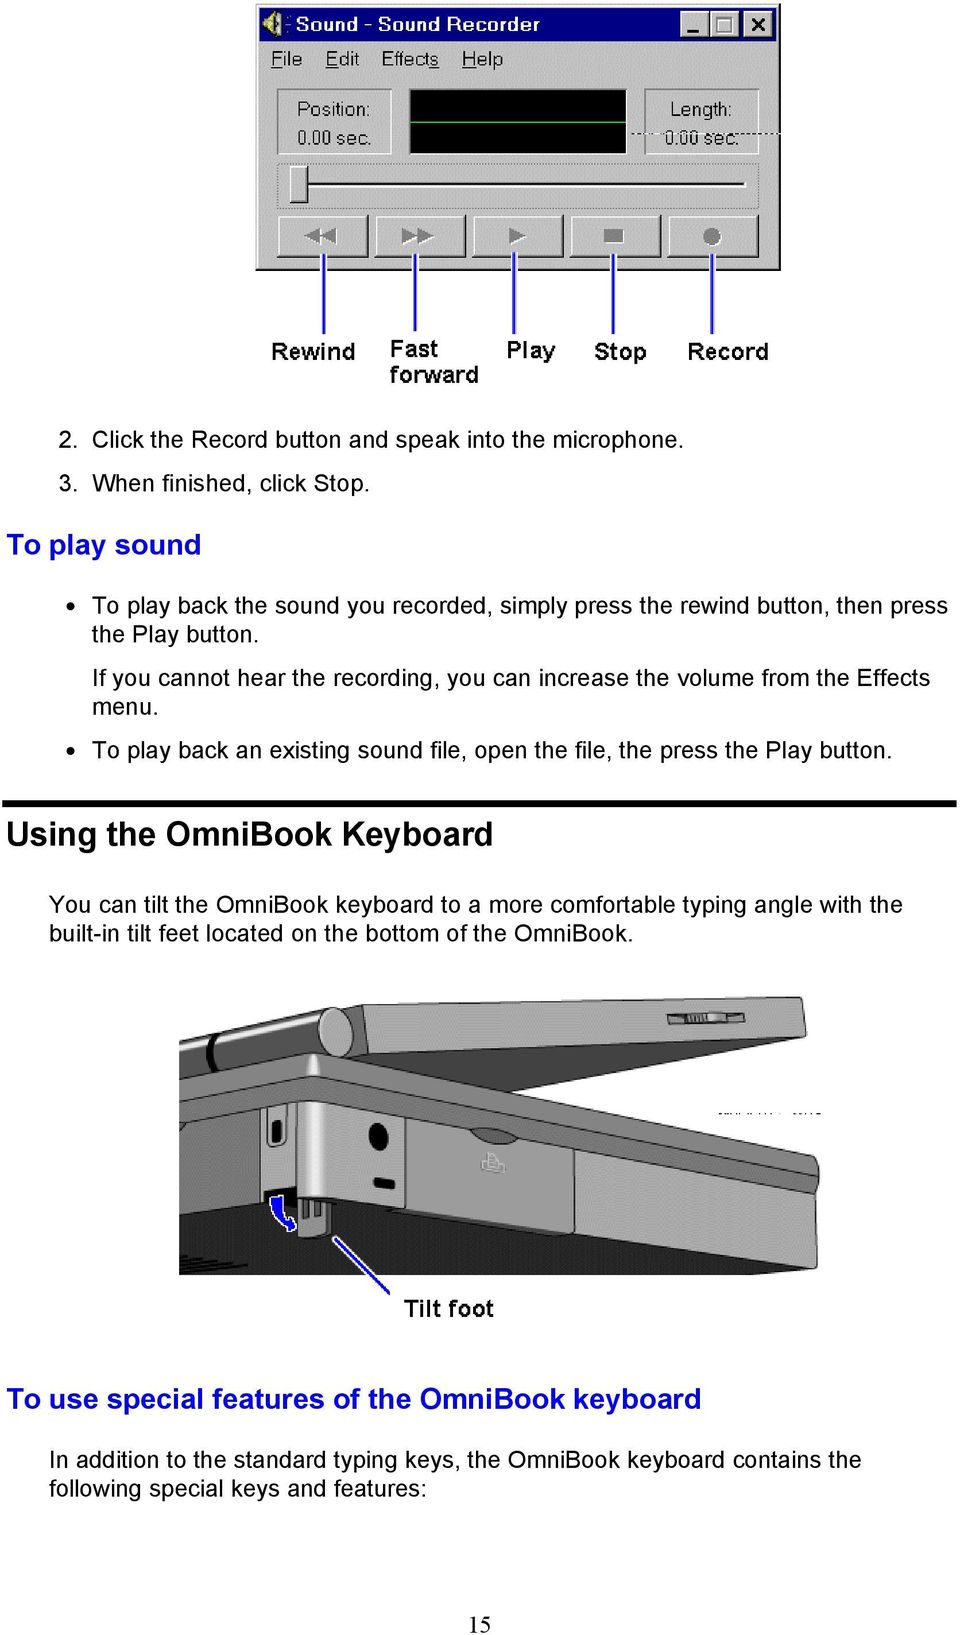 If you cannot hear the recording, you can increase the volume from the Effects menu. To play back an existing sound file, open the file, the press the Play button.